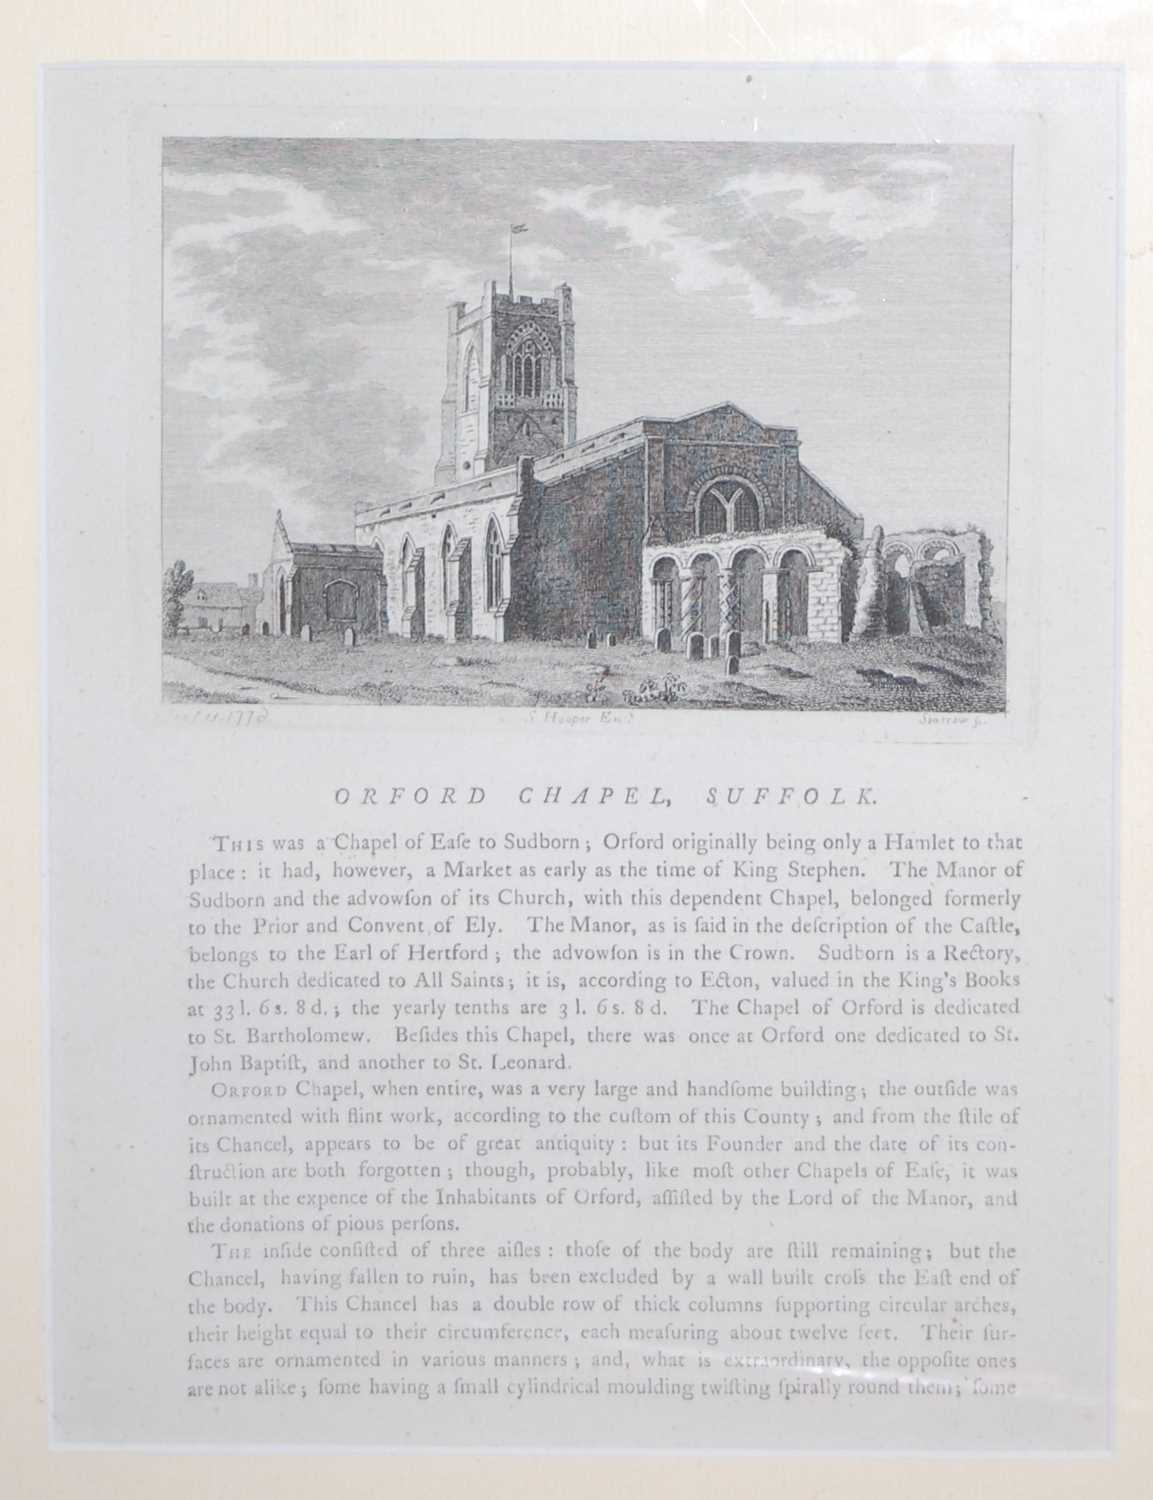 After Sparrow - Orford Chapel, Suffolk, etched bookplate, framed and glazed, plate size 11 x 16cm;